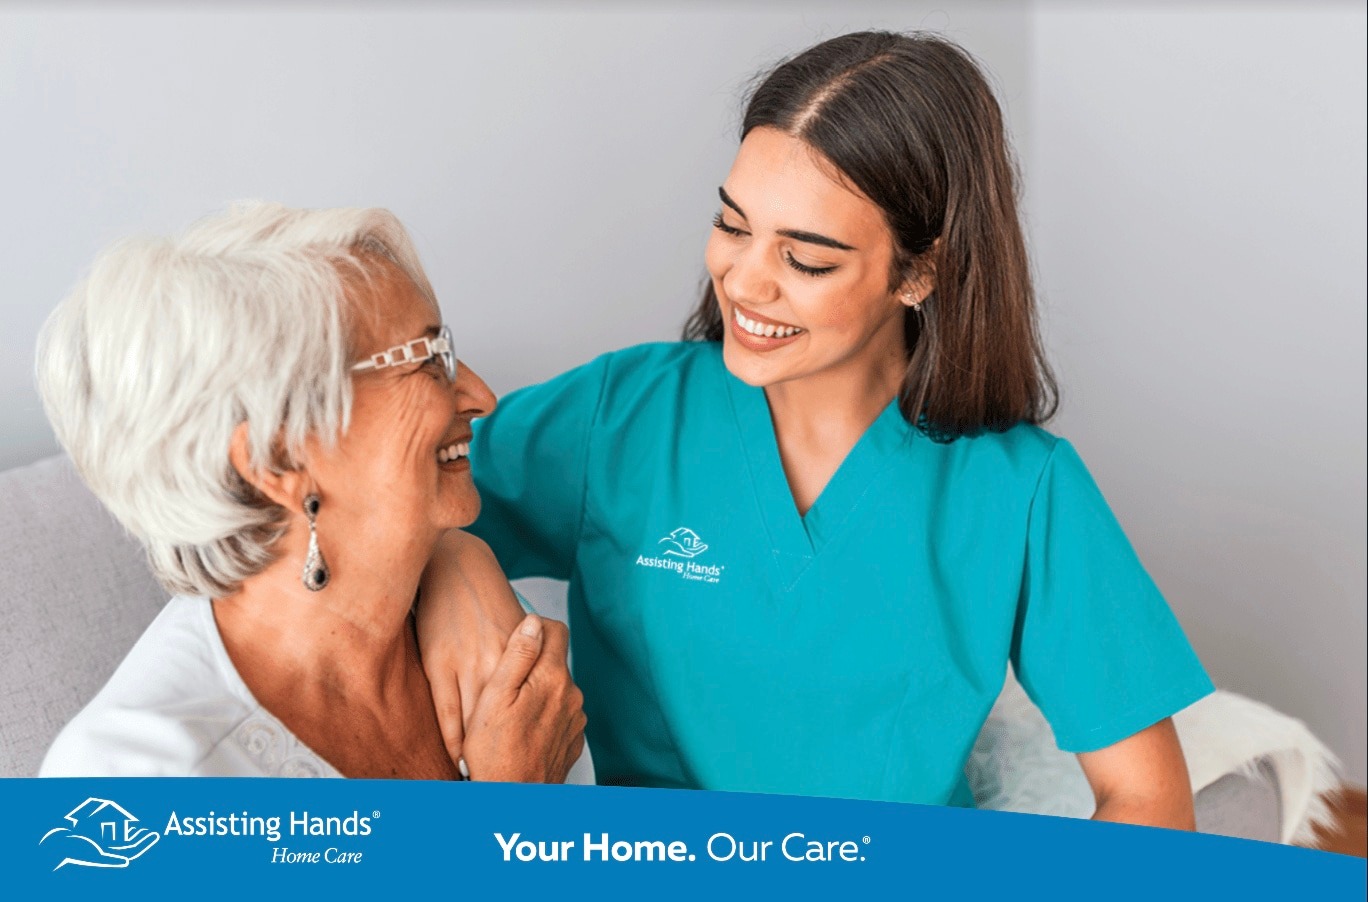 Assisting Hands Home Care provides dependable and compassionate home care services